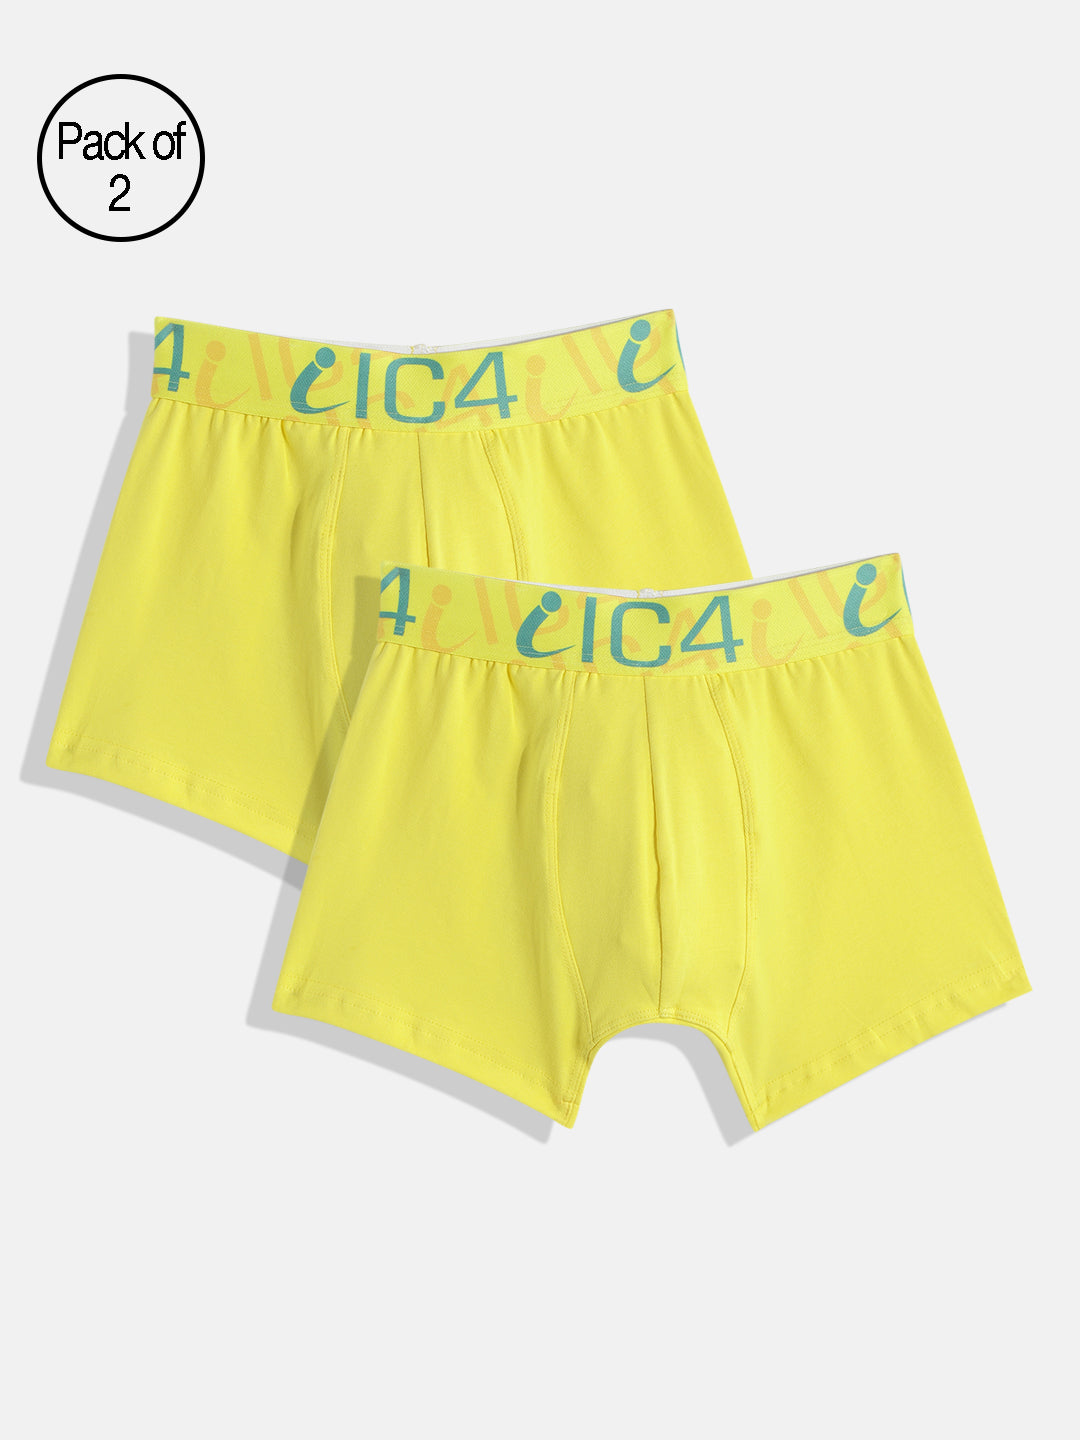 IC4 Boy's Fashion Trunk Combo Pack of 2, Yellow Color